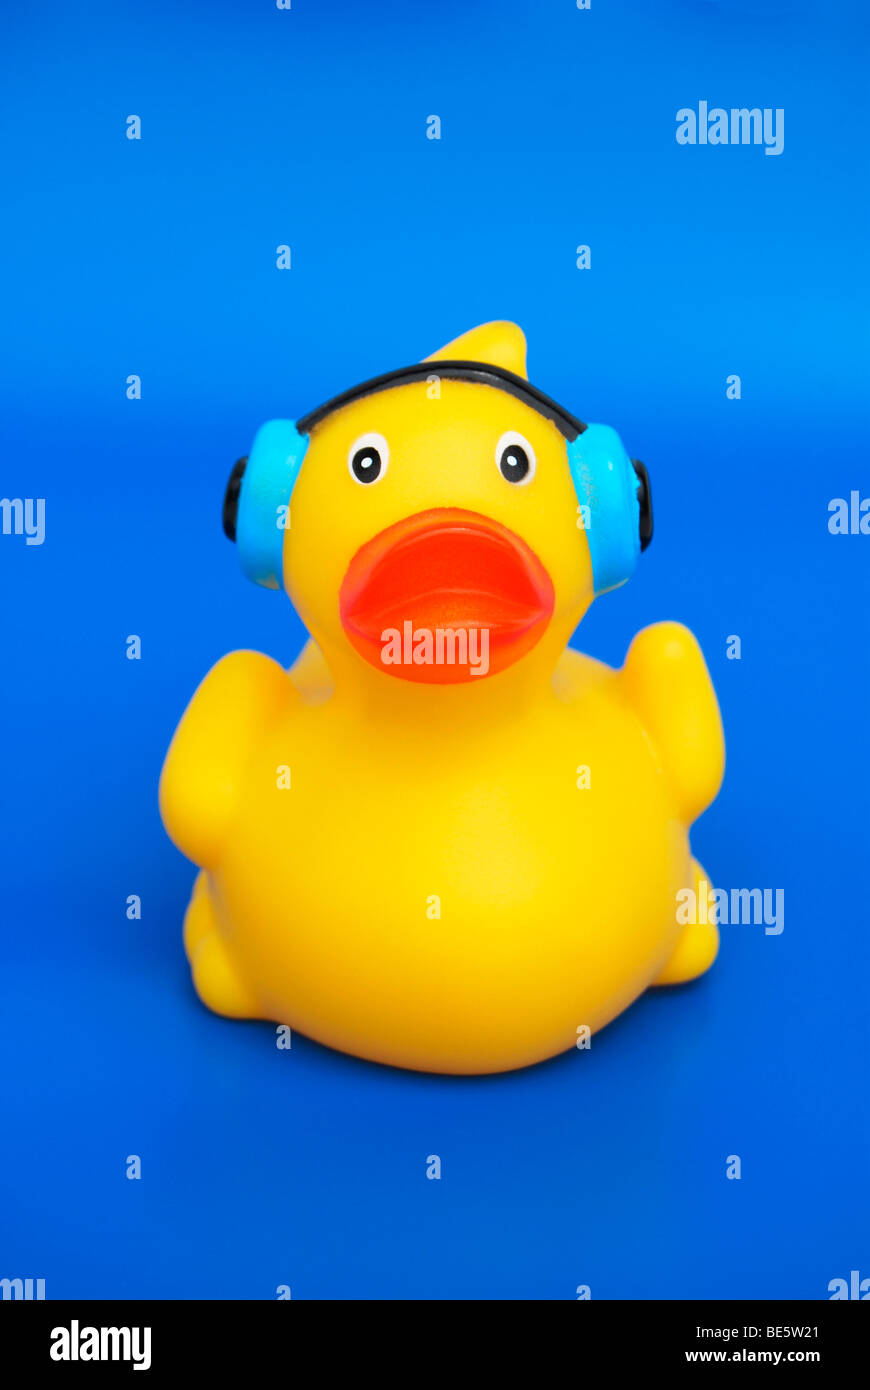 Yellow rubber duck with headphones, symbolic image for music, noise, acoustics, better hearing Stock Photo